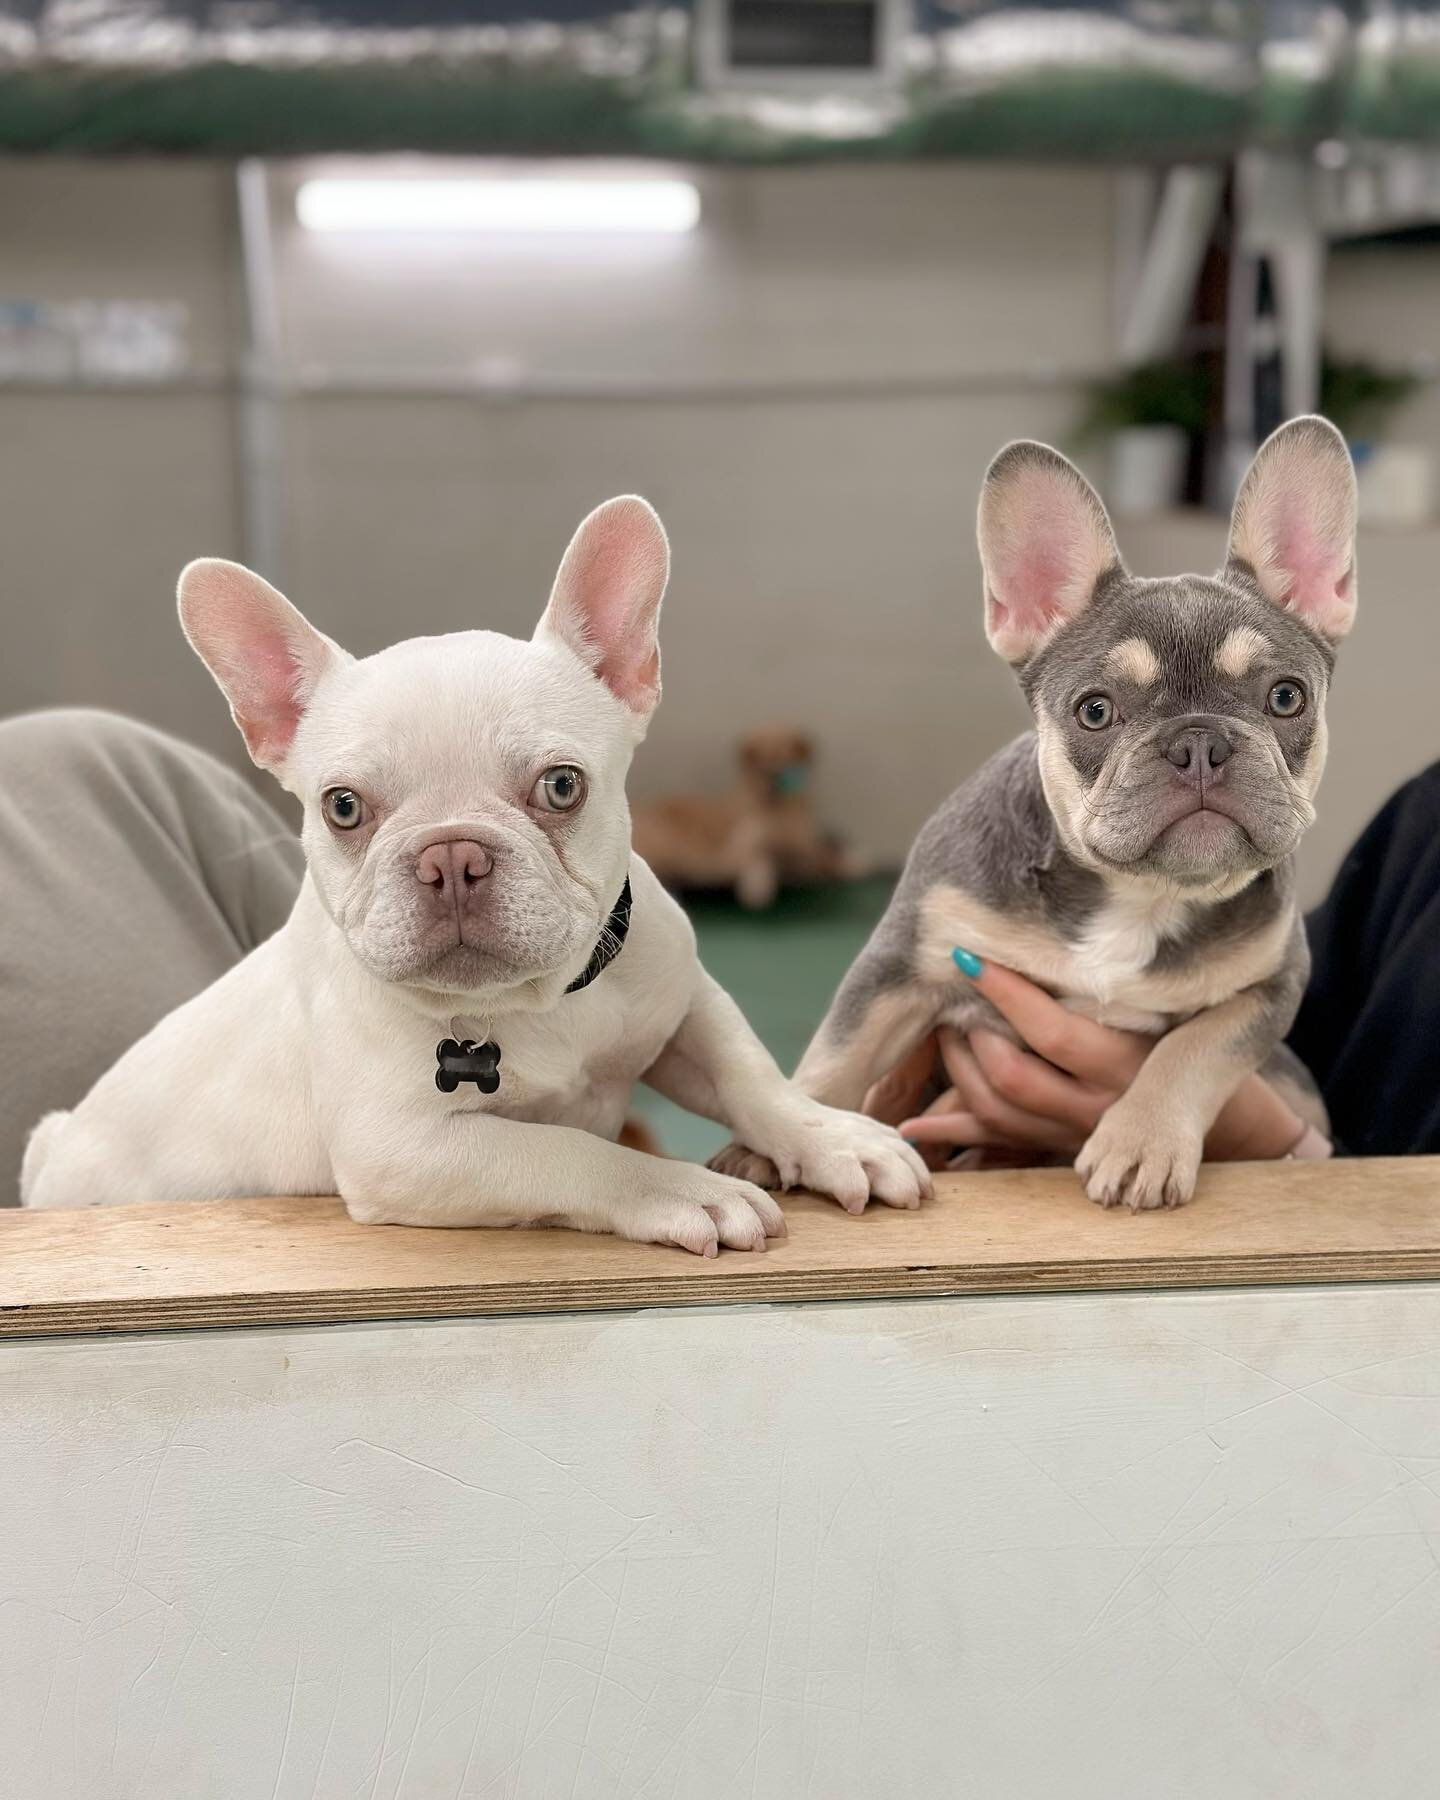 Well hello there! Baby Frenchies Bruno and Ace are just perfection together! 😍